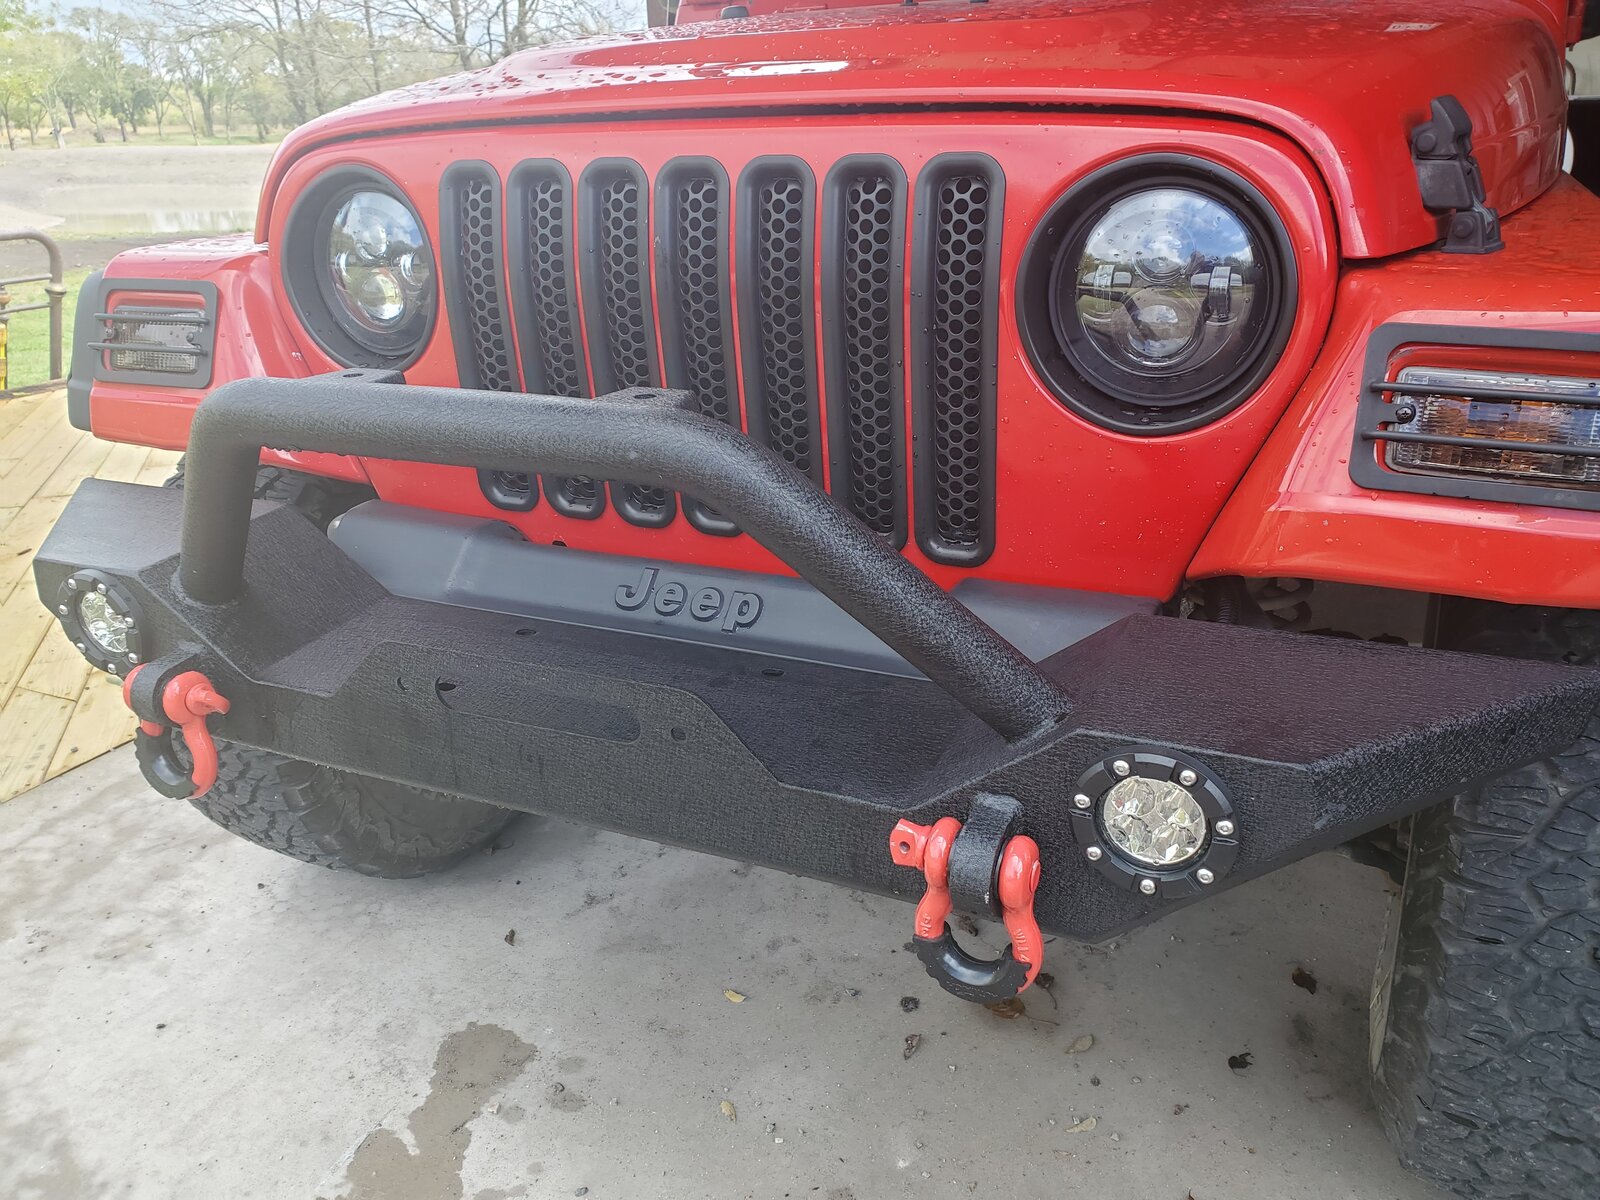 Help identifying parts of new-to-me 05 TJ | Jeep Wrangler TJ Forum